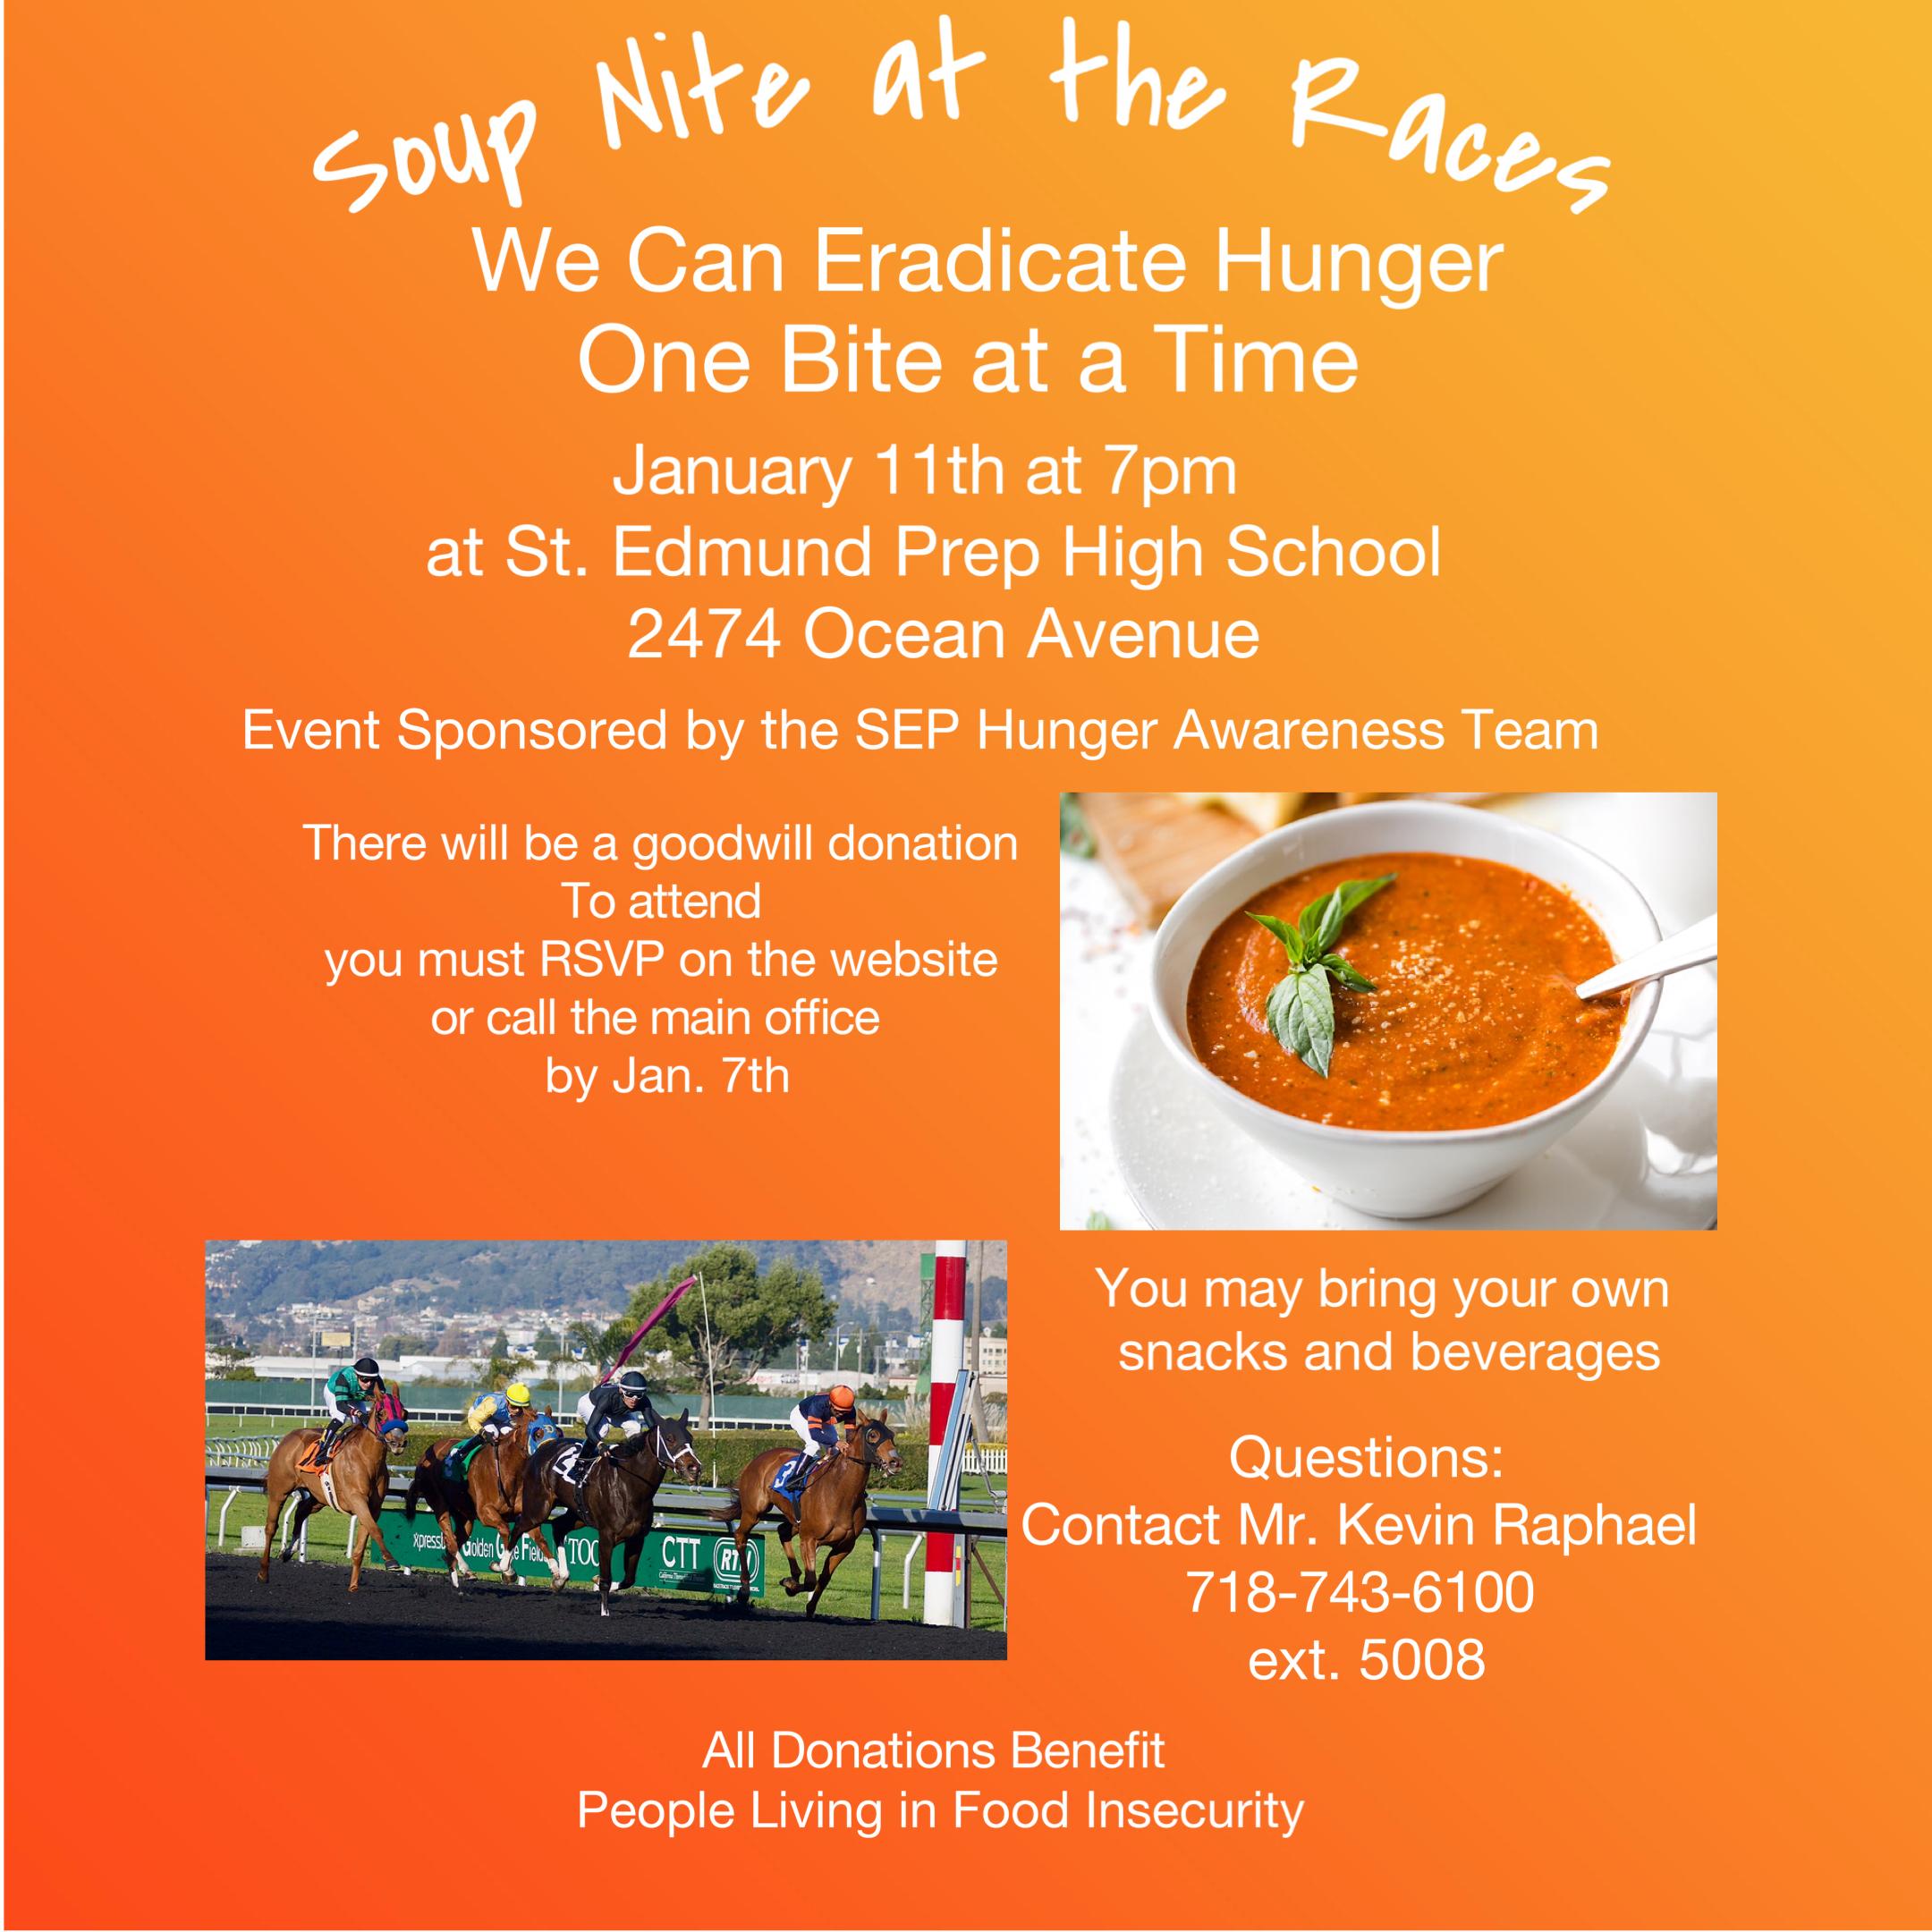 Hunger Awareness Soup Night at the Races